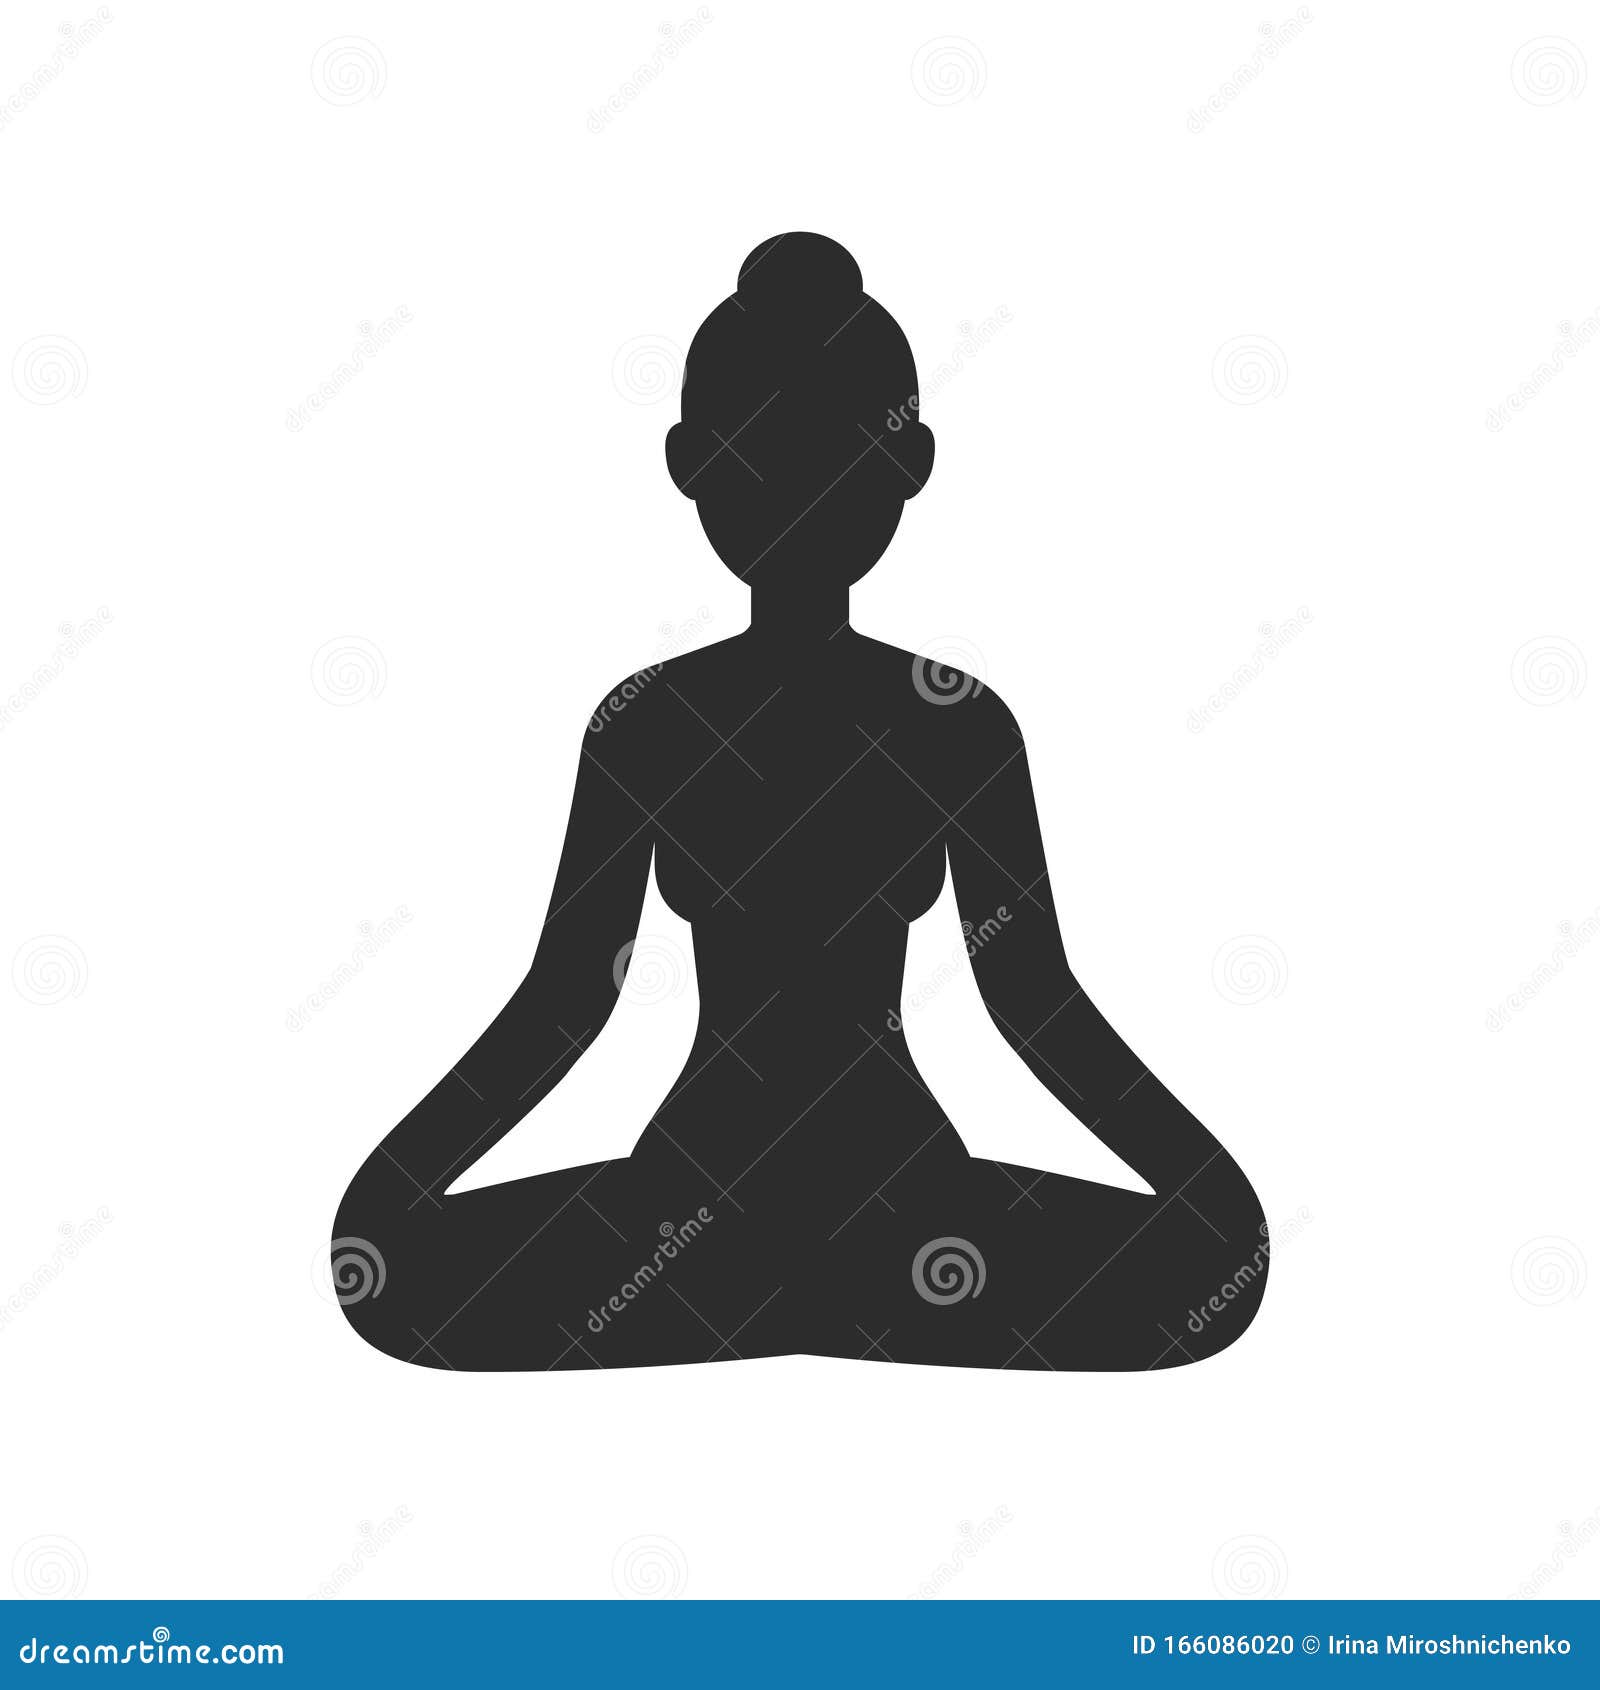 Meditating silhouette sitting in lotus position Vector Image